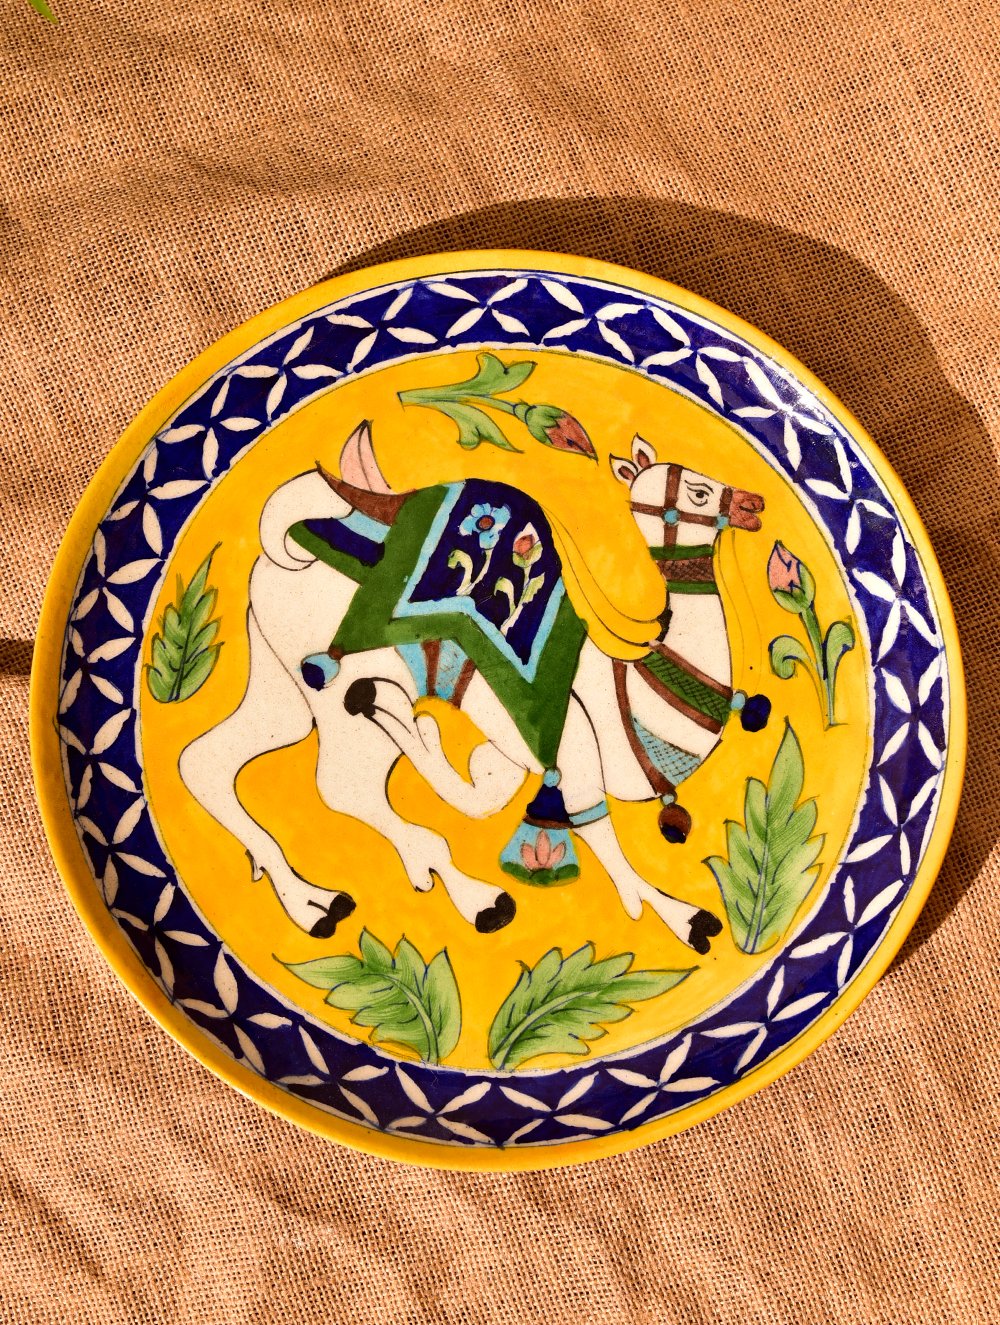 Load image into Gallery viewer, Jaipur Blue Pottery Decorative Plate in Wooden Box - Yellow Camel